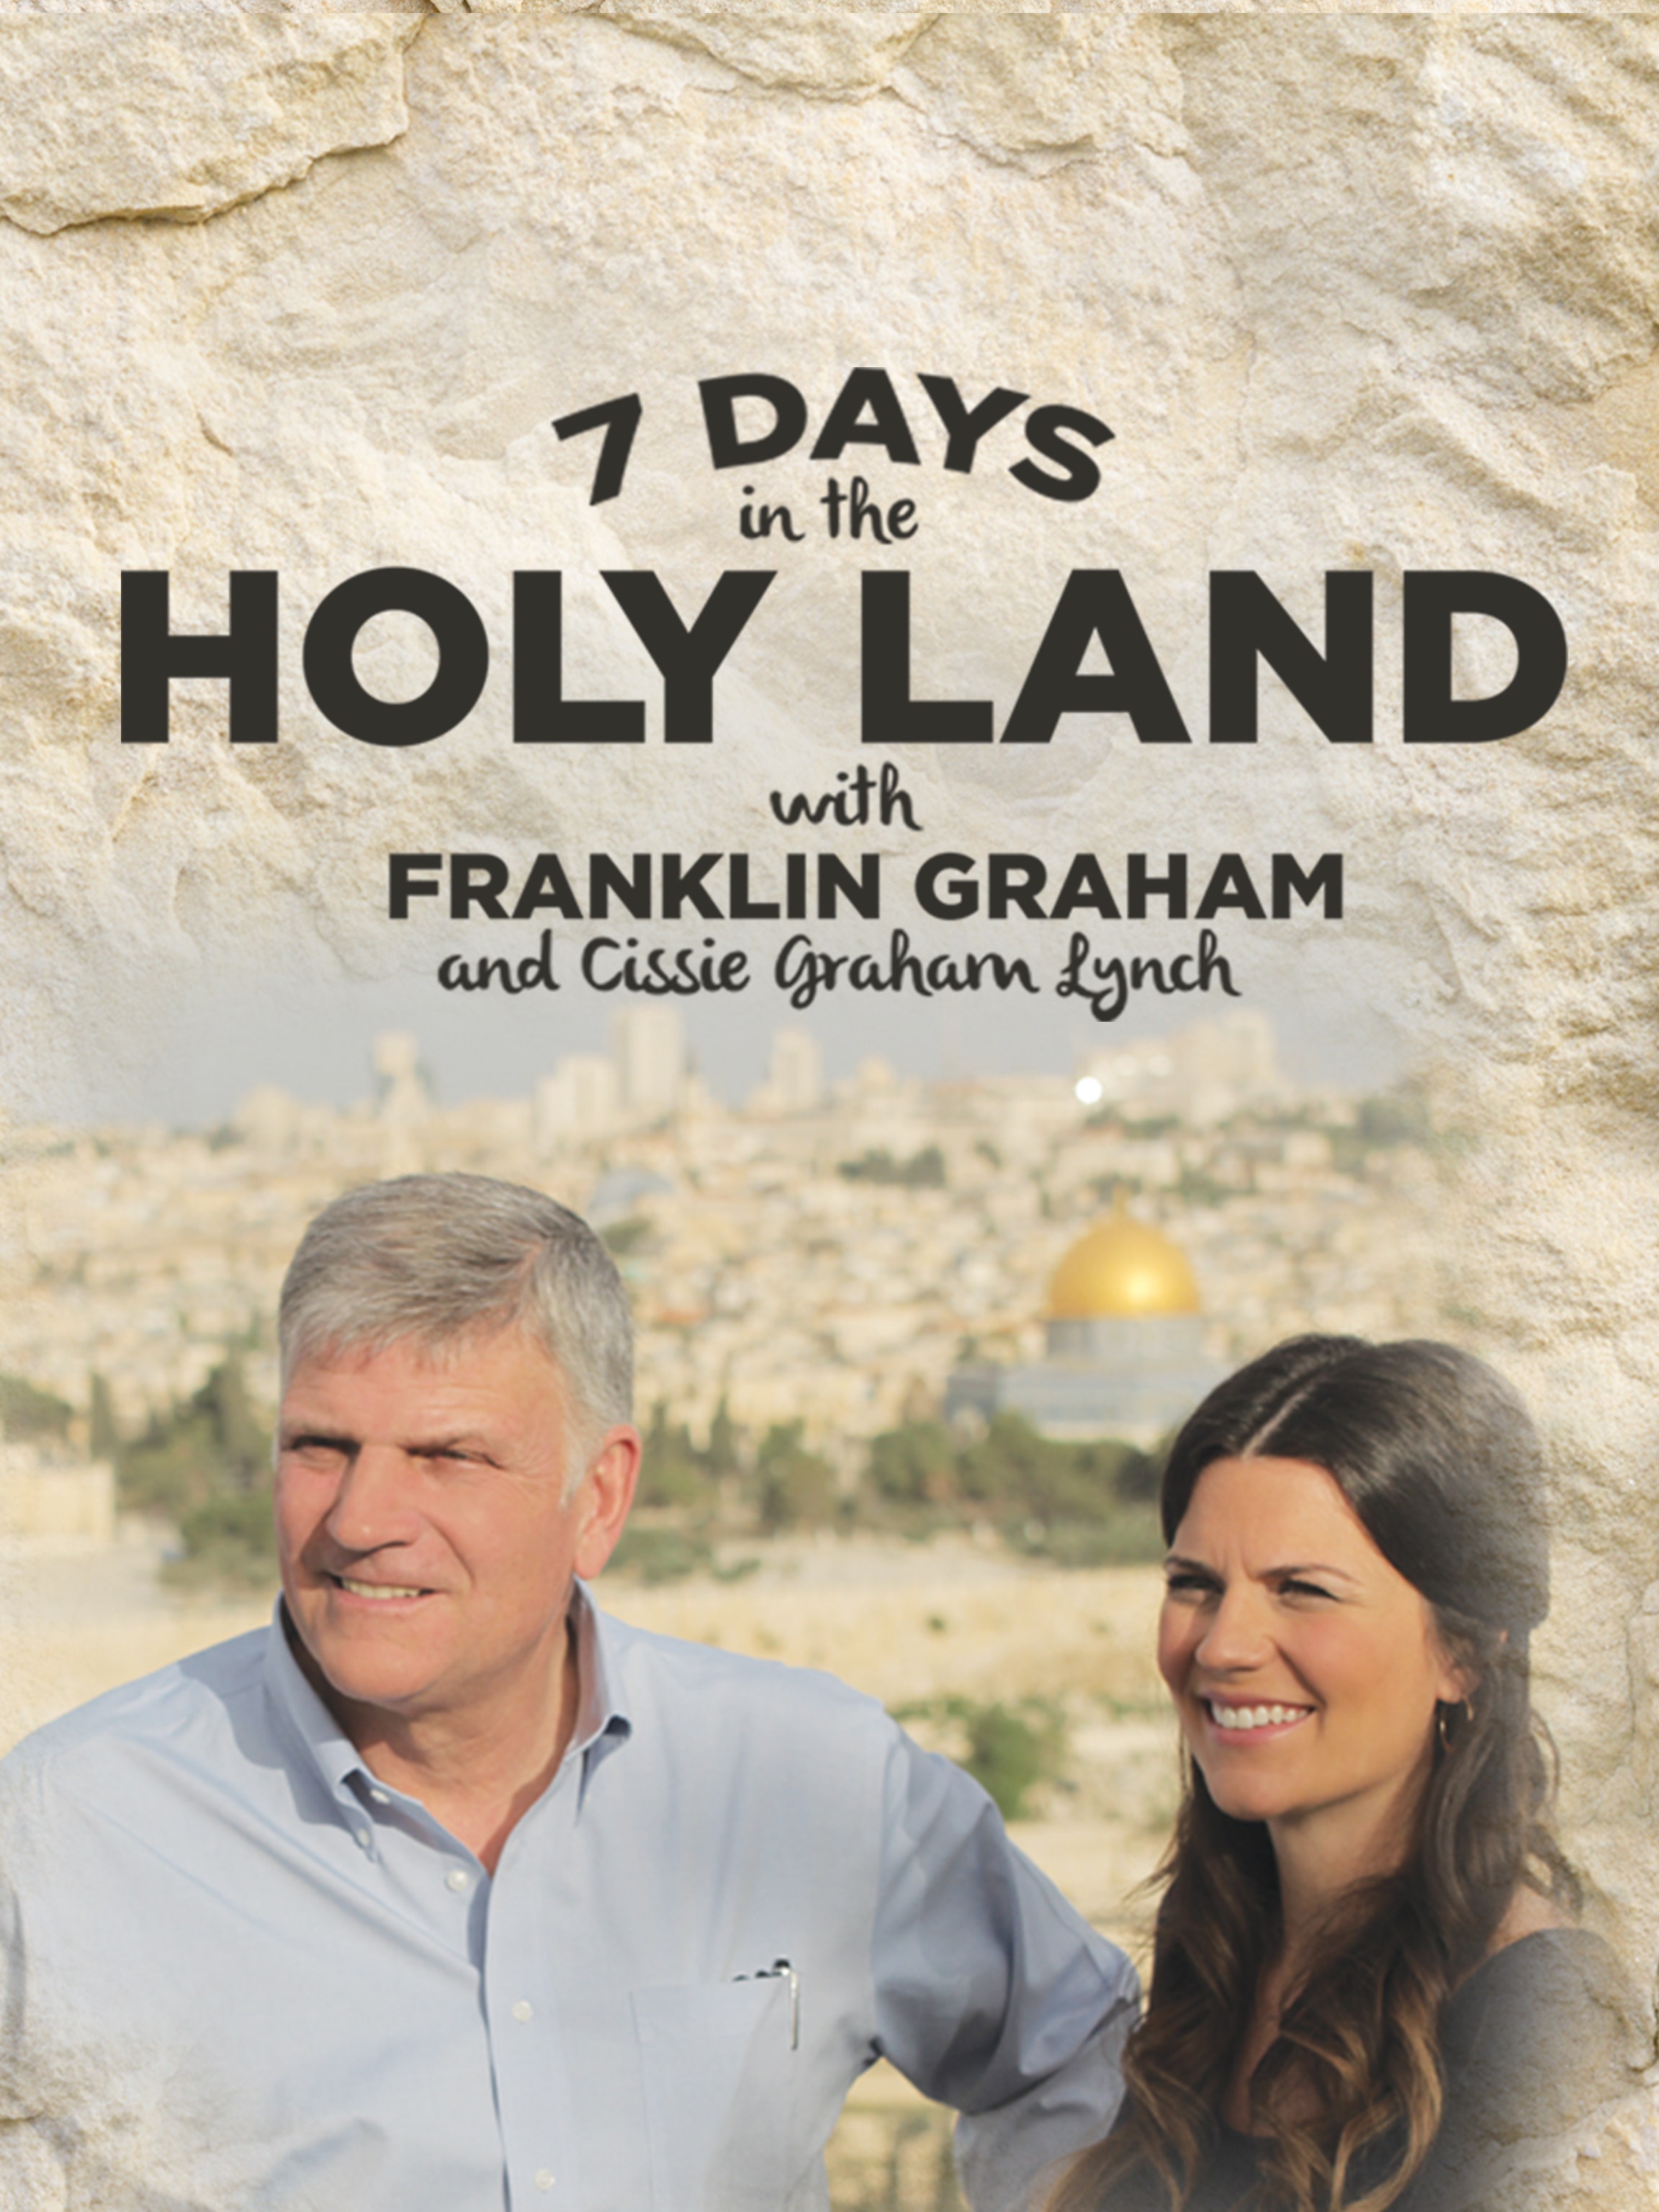 7 Days in the Holy Land dcg-mark-poster